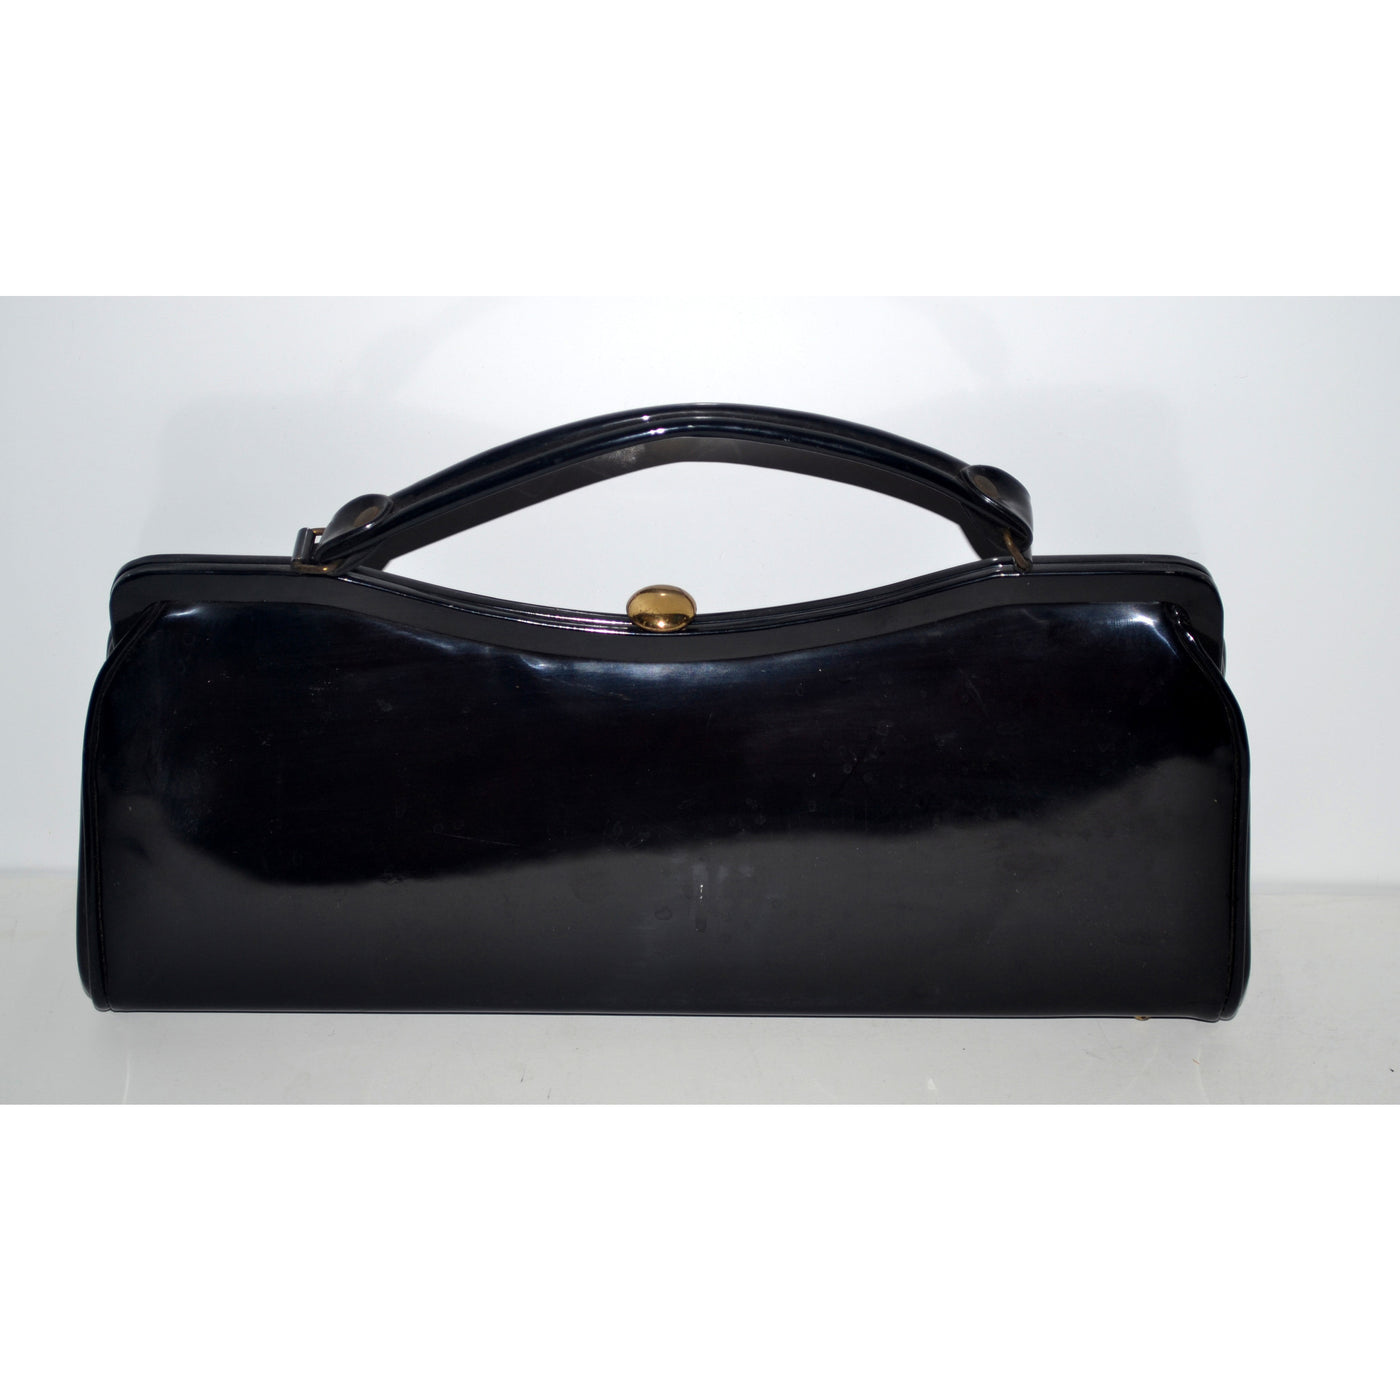 Vintage Curved Patent Leather Purse By Dover 